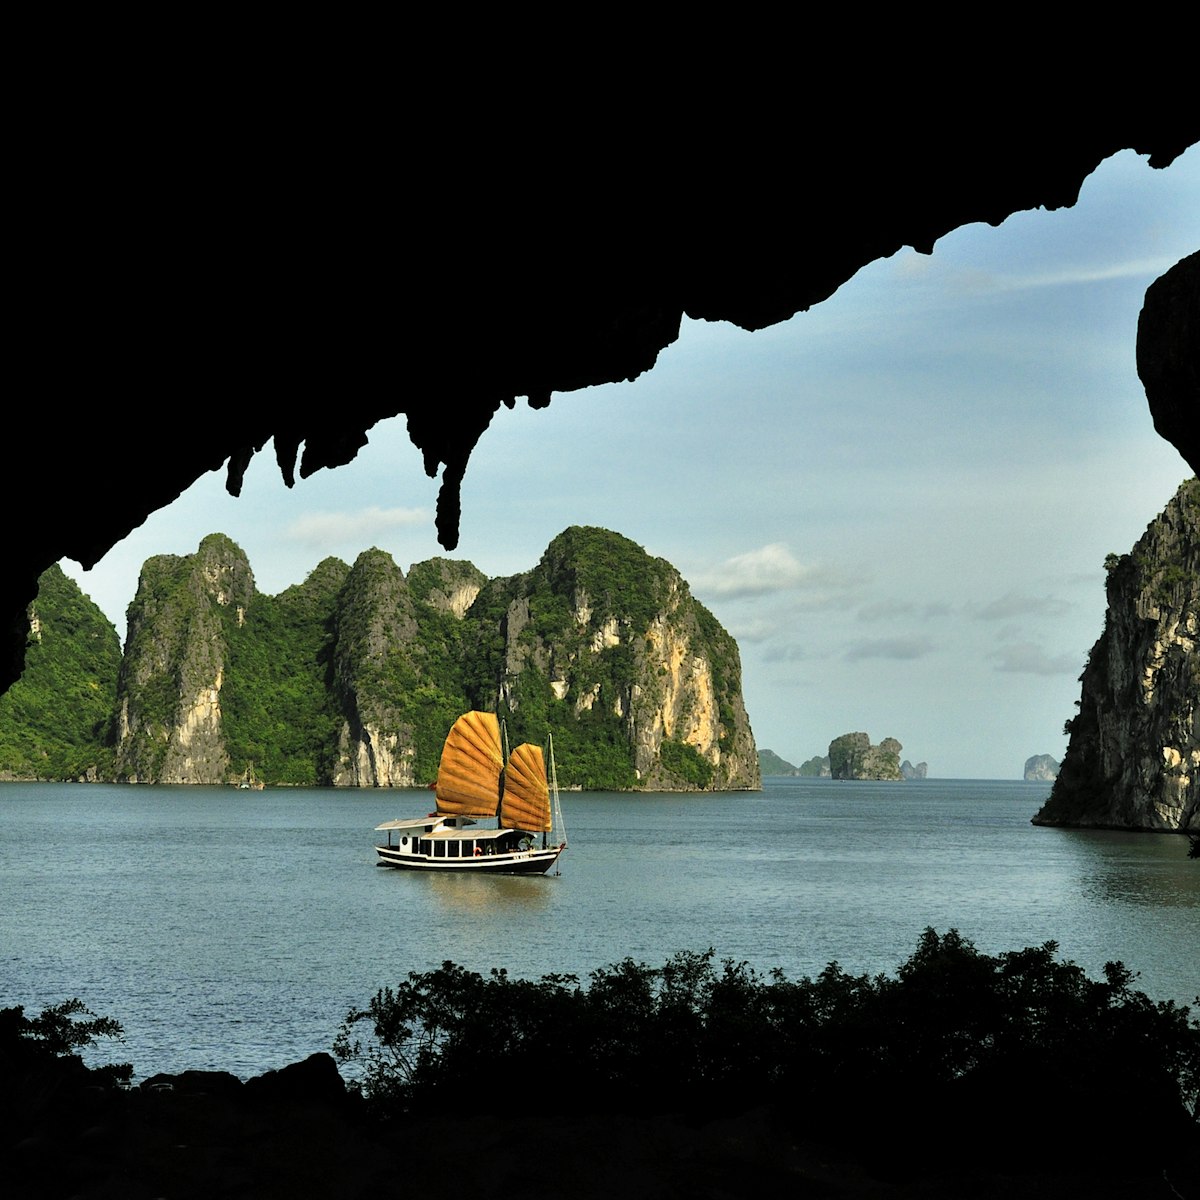 Hang Trong Cave also known as Drum Cave – The most beautiful cave in Ha Long Bay.